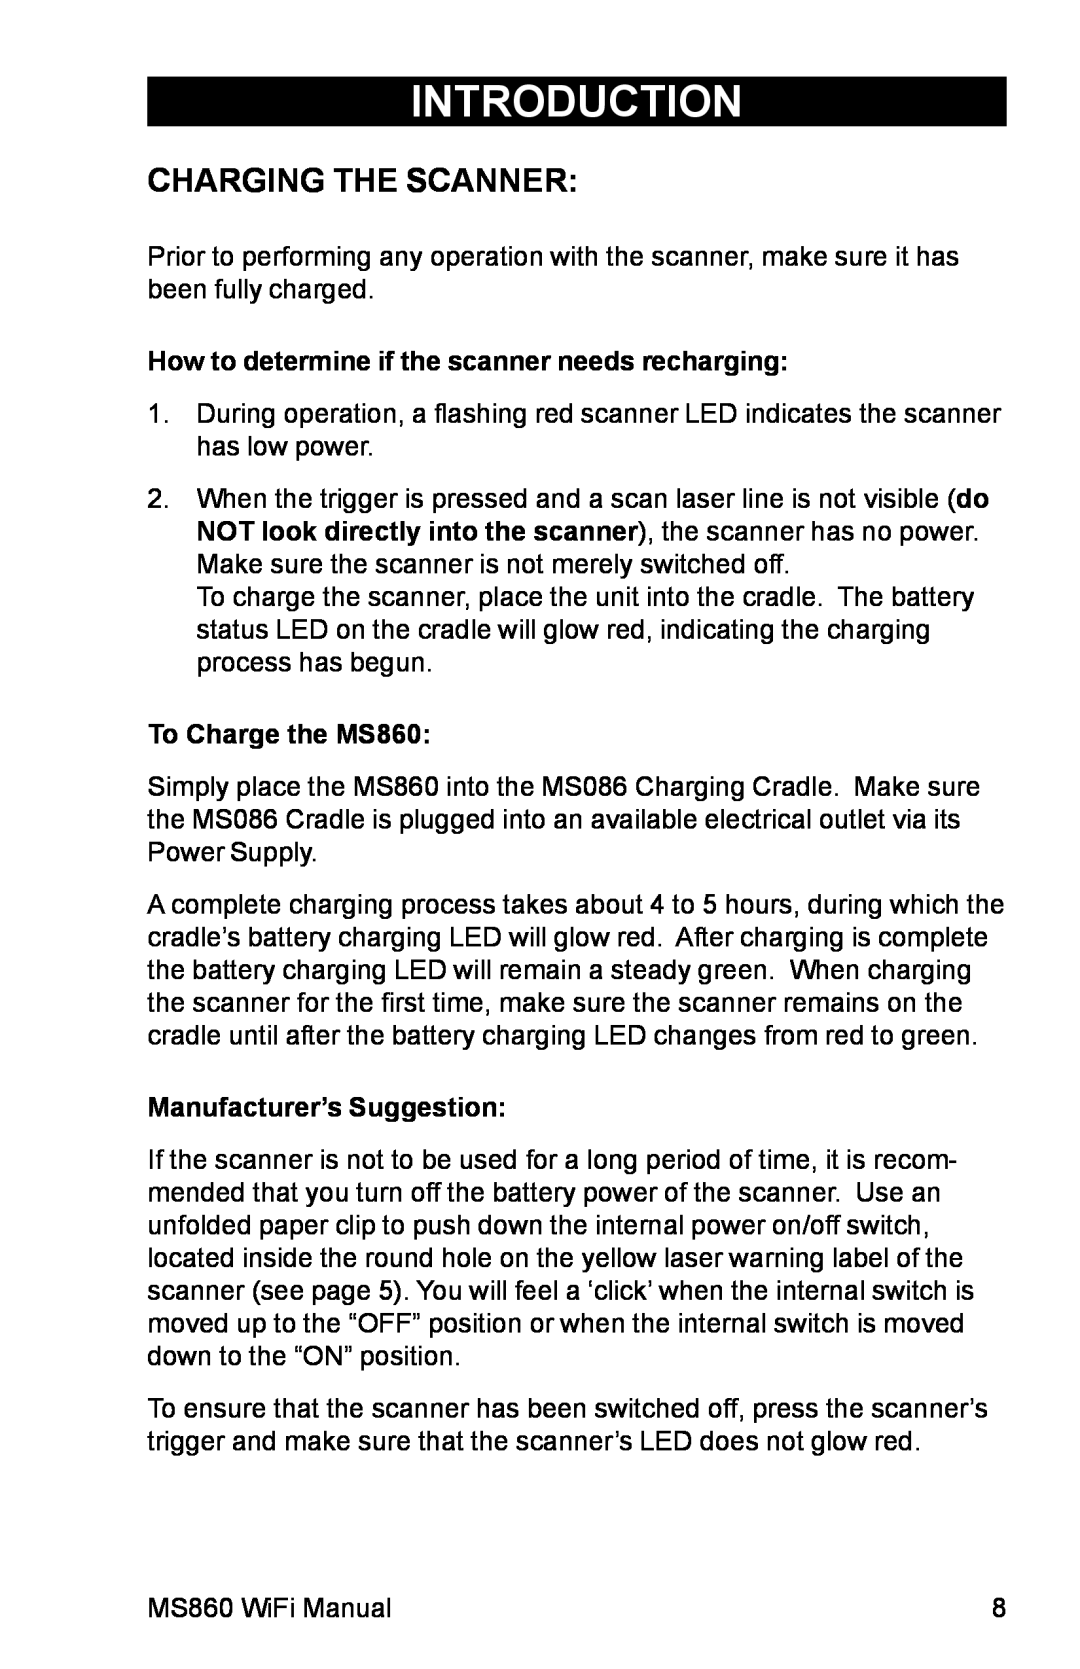 Unitech manual Charging The Scanner, Introduction, How to determine if the scanner needs recharging, To Charge the MS860 